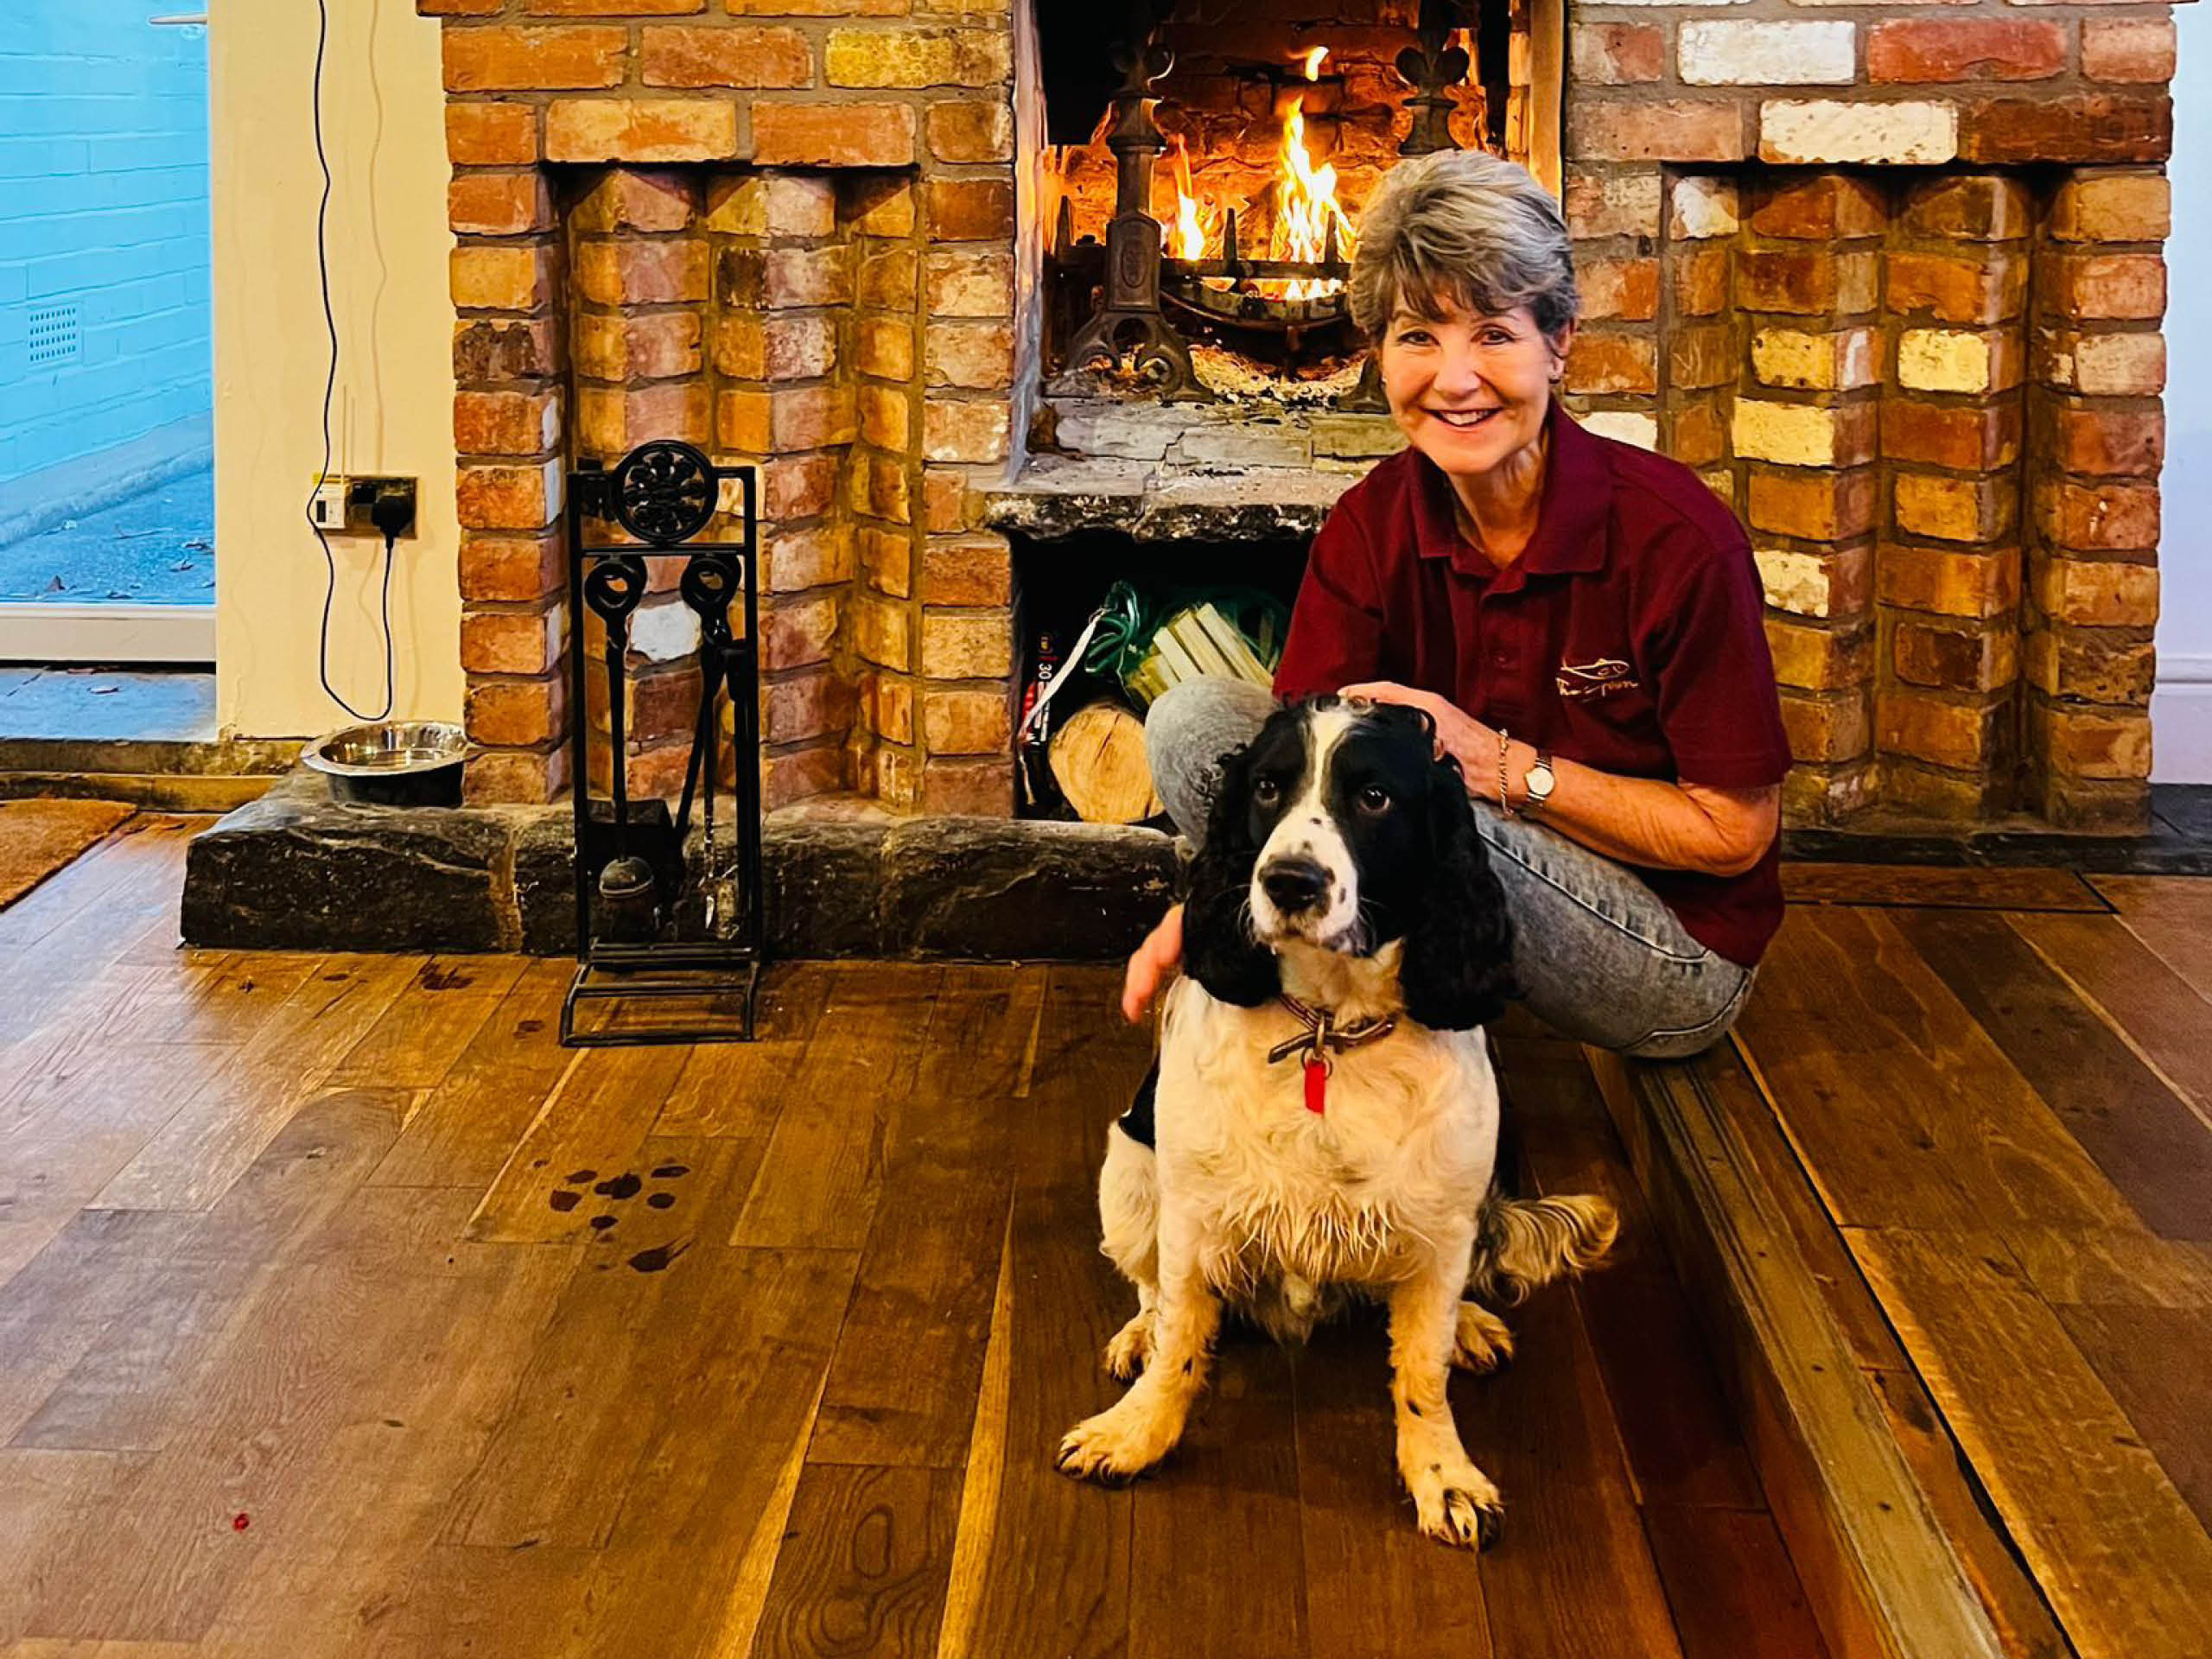 Owner of The Fish, Wixford sat infront of a fireplace with the pub dog.